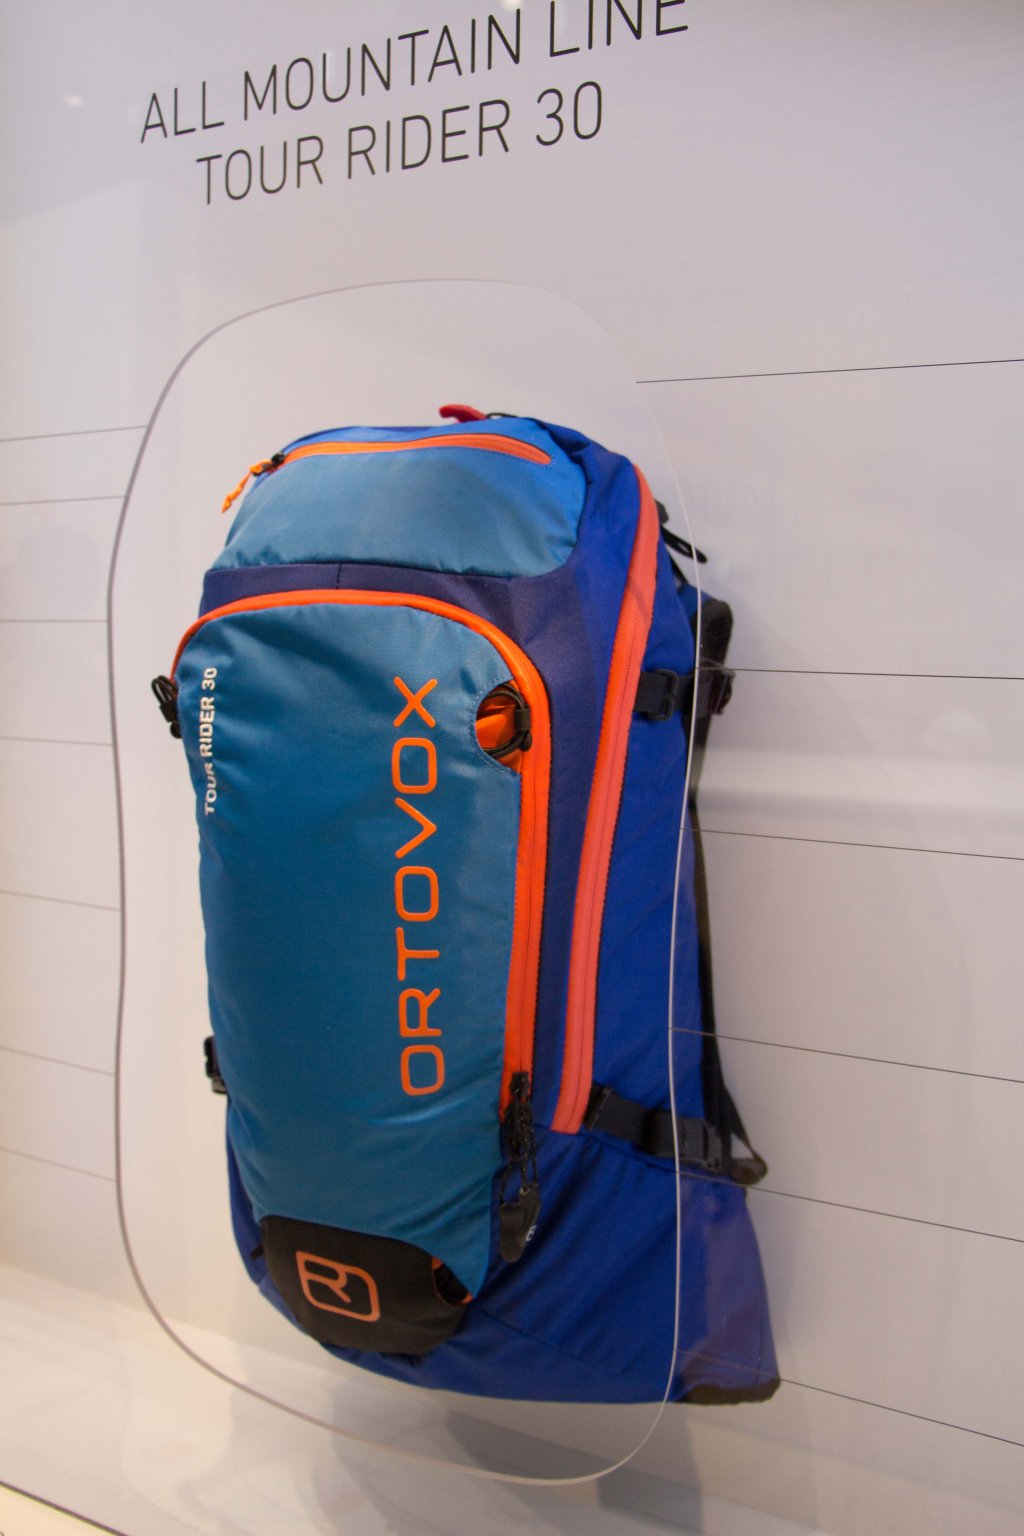 Ortovox avalanche airbag backpack